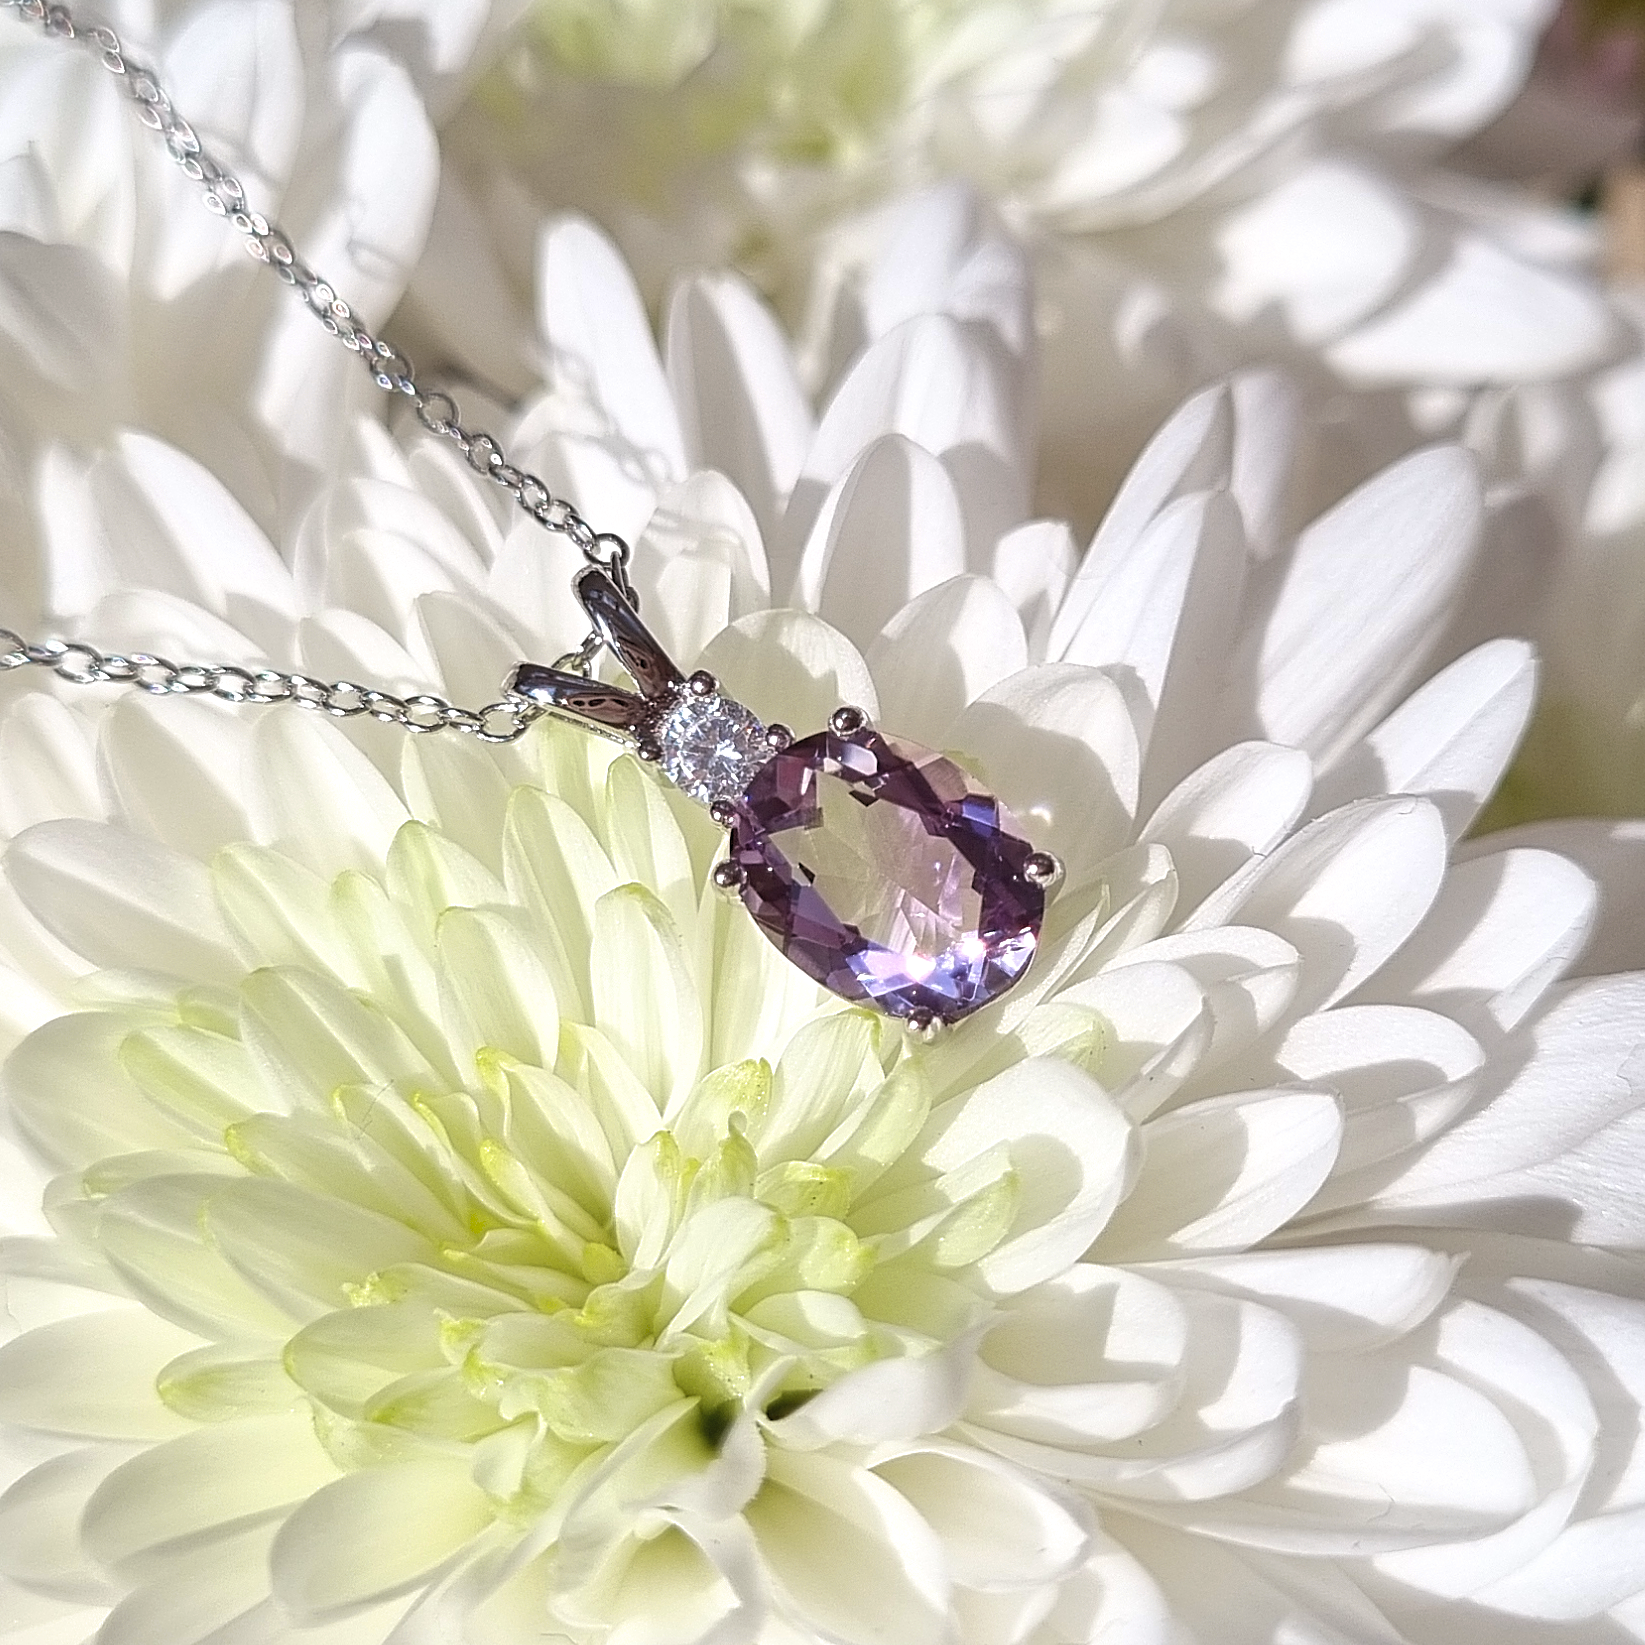 Lavender Amethyst Pendant Necklace in Sterling Silver